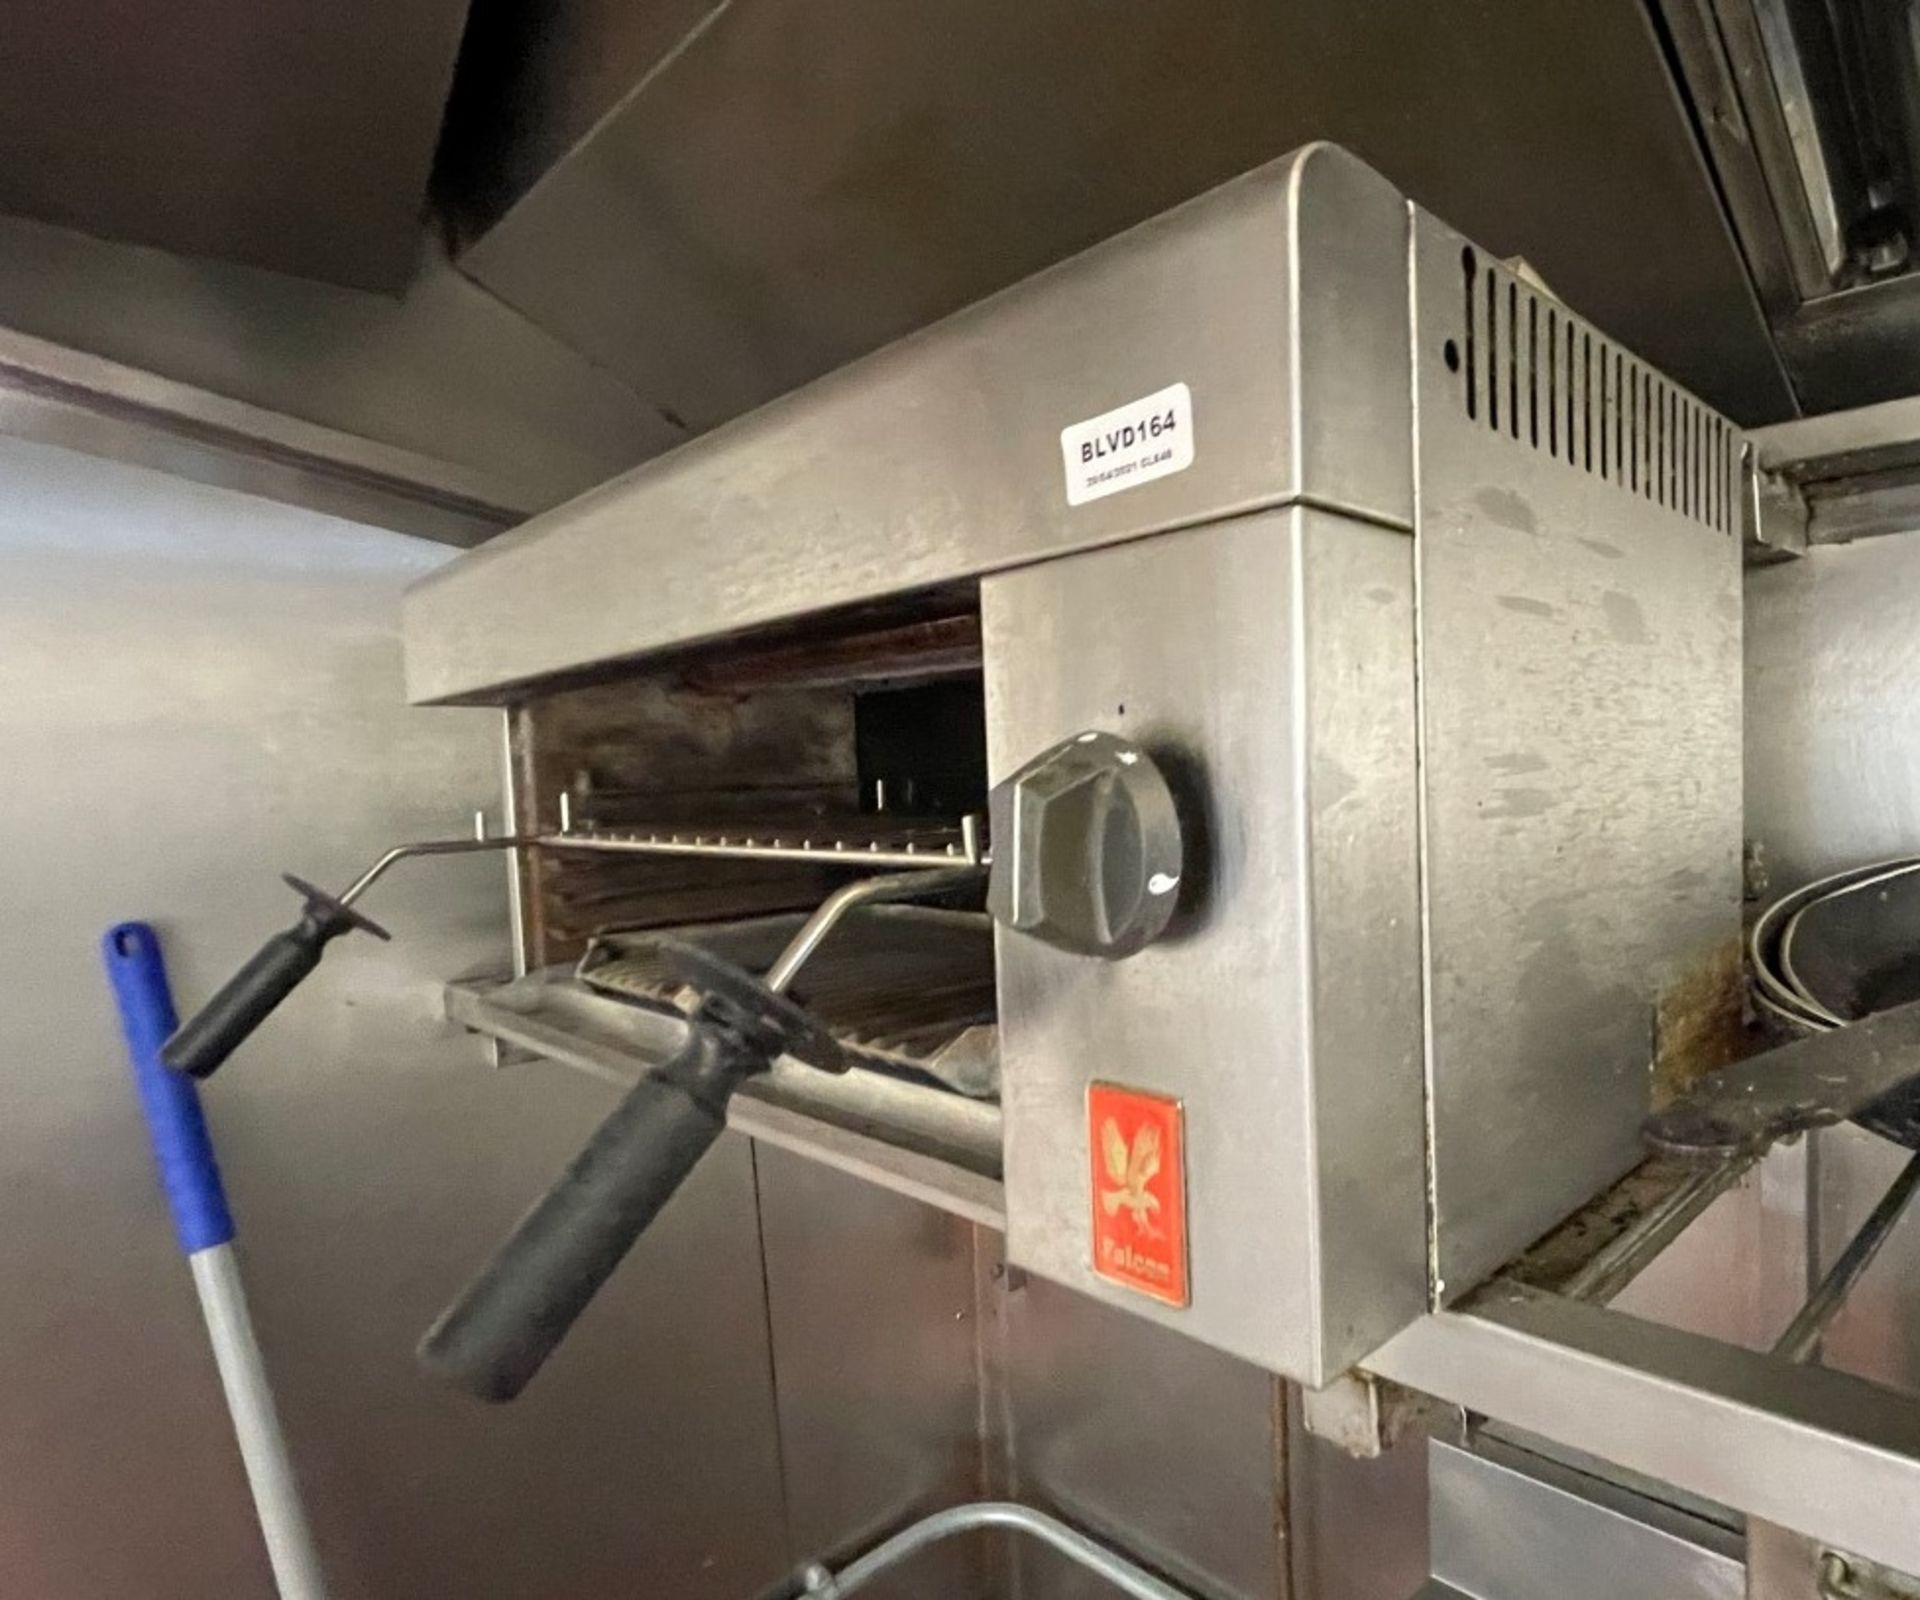 1 x Falcon Wall Mounted Gas Fired Salamander Grill - Ref: BLVD164 - CL649 - Location: London